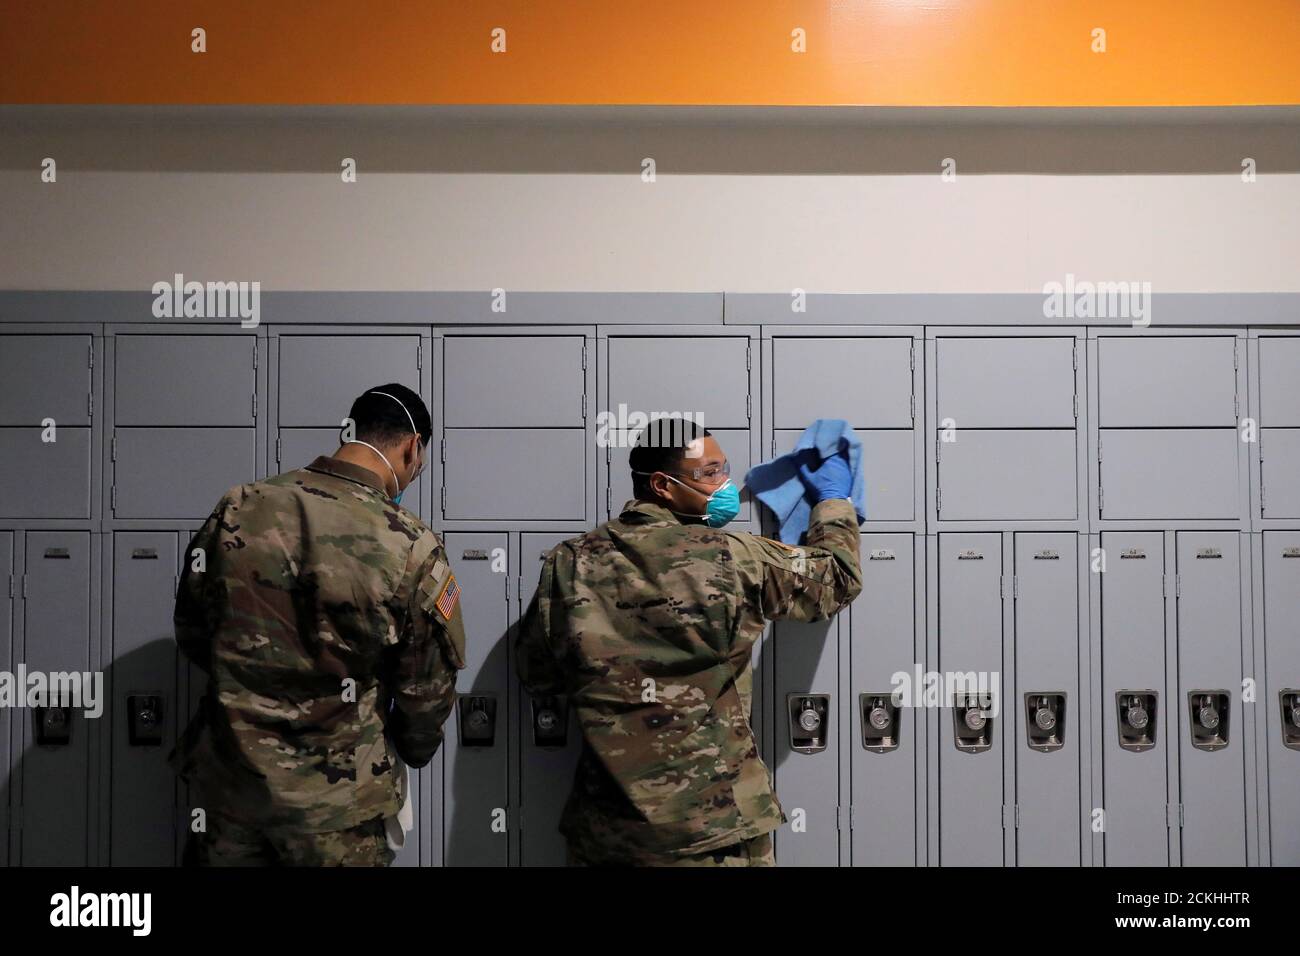 Members of Joint Task Force 2, composed of soldiers and airmen from the New York Army and Air National Guard, work to sanitize the New Rochelle High School during the coronavirus disease (COVID-19) outbreak in New Rochelle, New York, U.S., March 21, 2020. REUTERS/Andrew Kelly Stock Photo